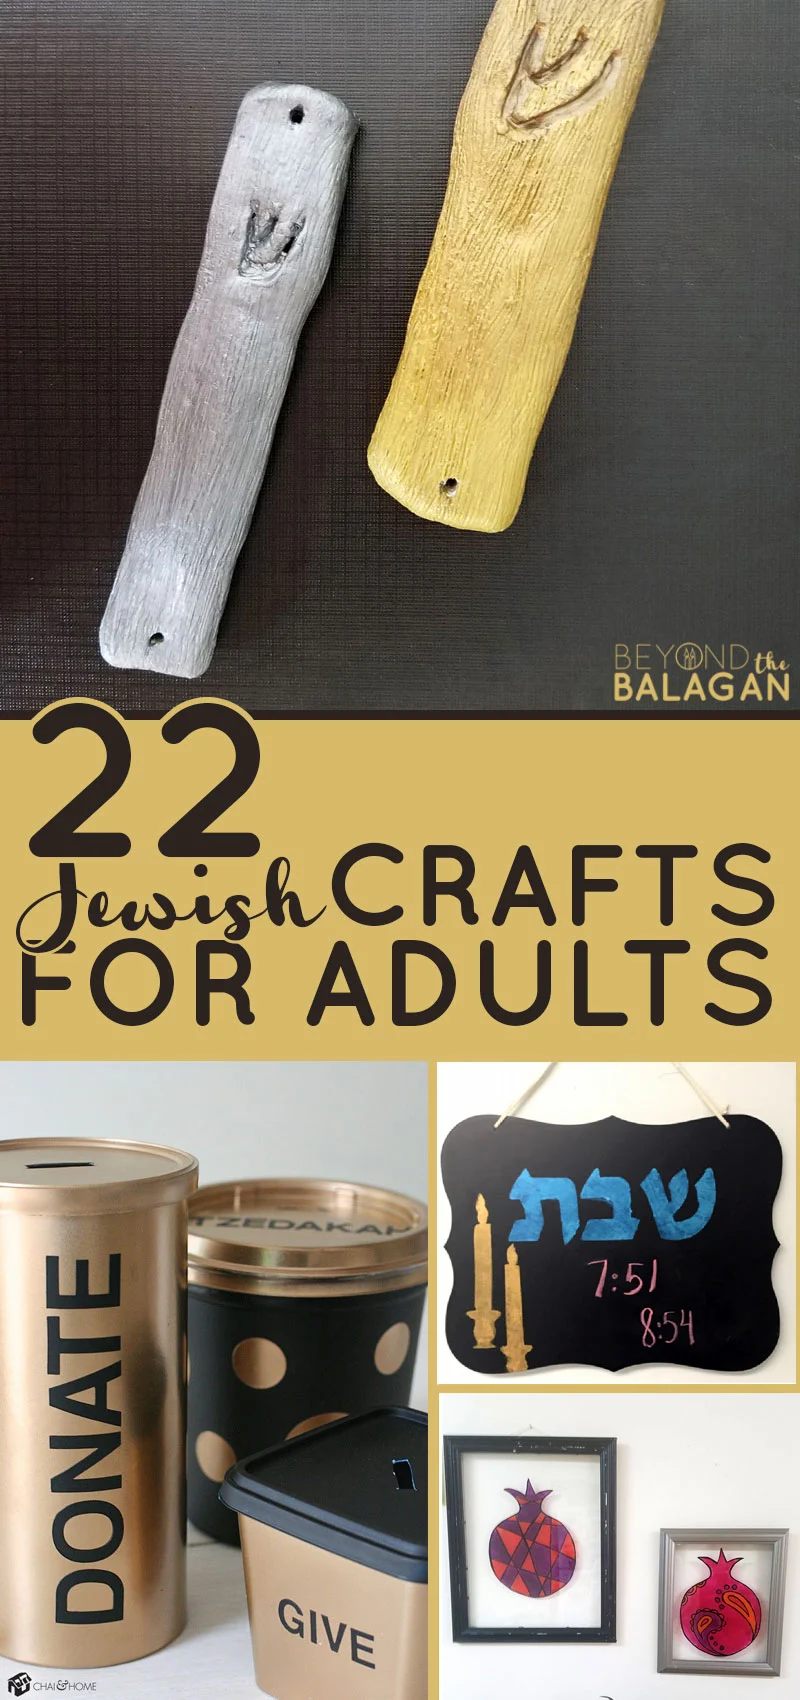 If you're looking for some cool Jewish crafts for adults, this list has everything you need - from DIY juidaica, to things Jewish moms can make for their kids, Jewish home decor, and Jewish holiday crafts...